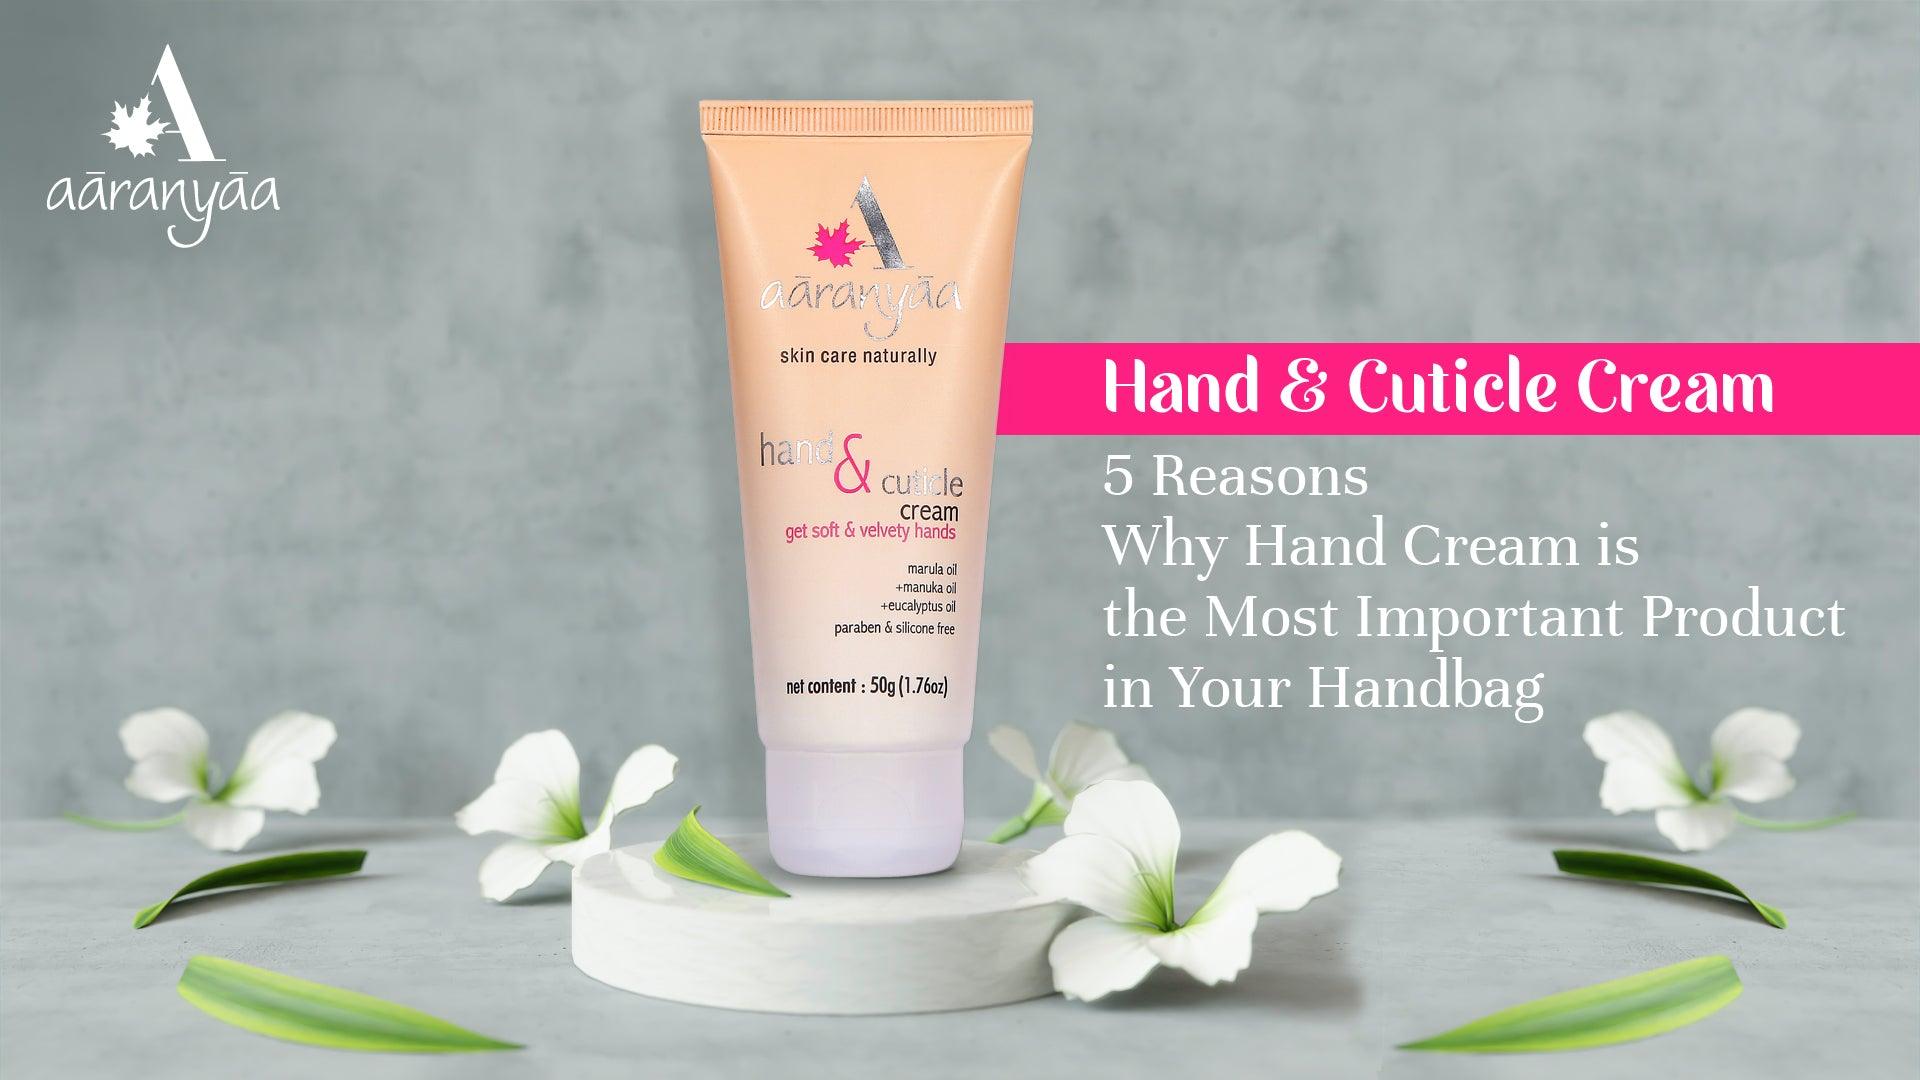 5 Reasons Why Hand Cream is the Most Important Product in Your Handbag - aaranyaa skincare